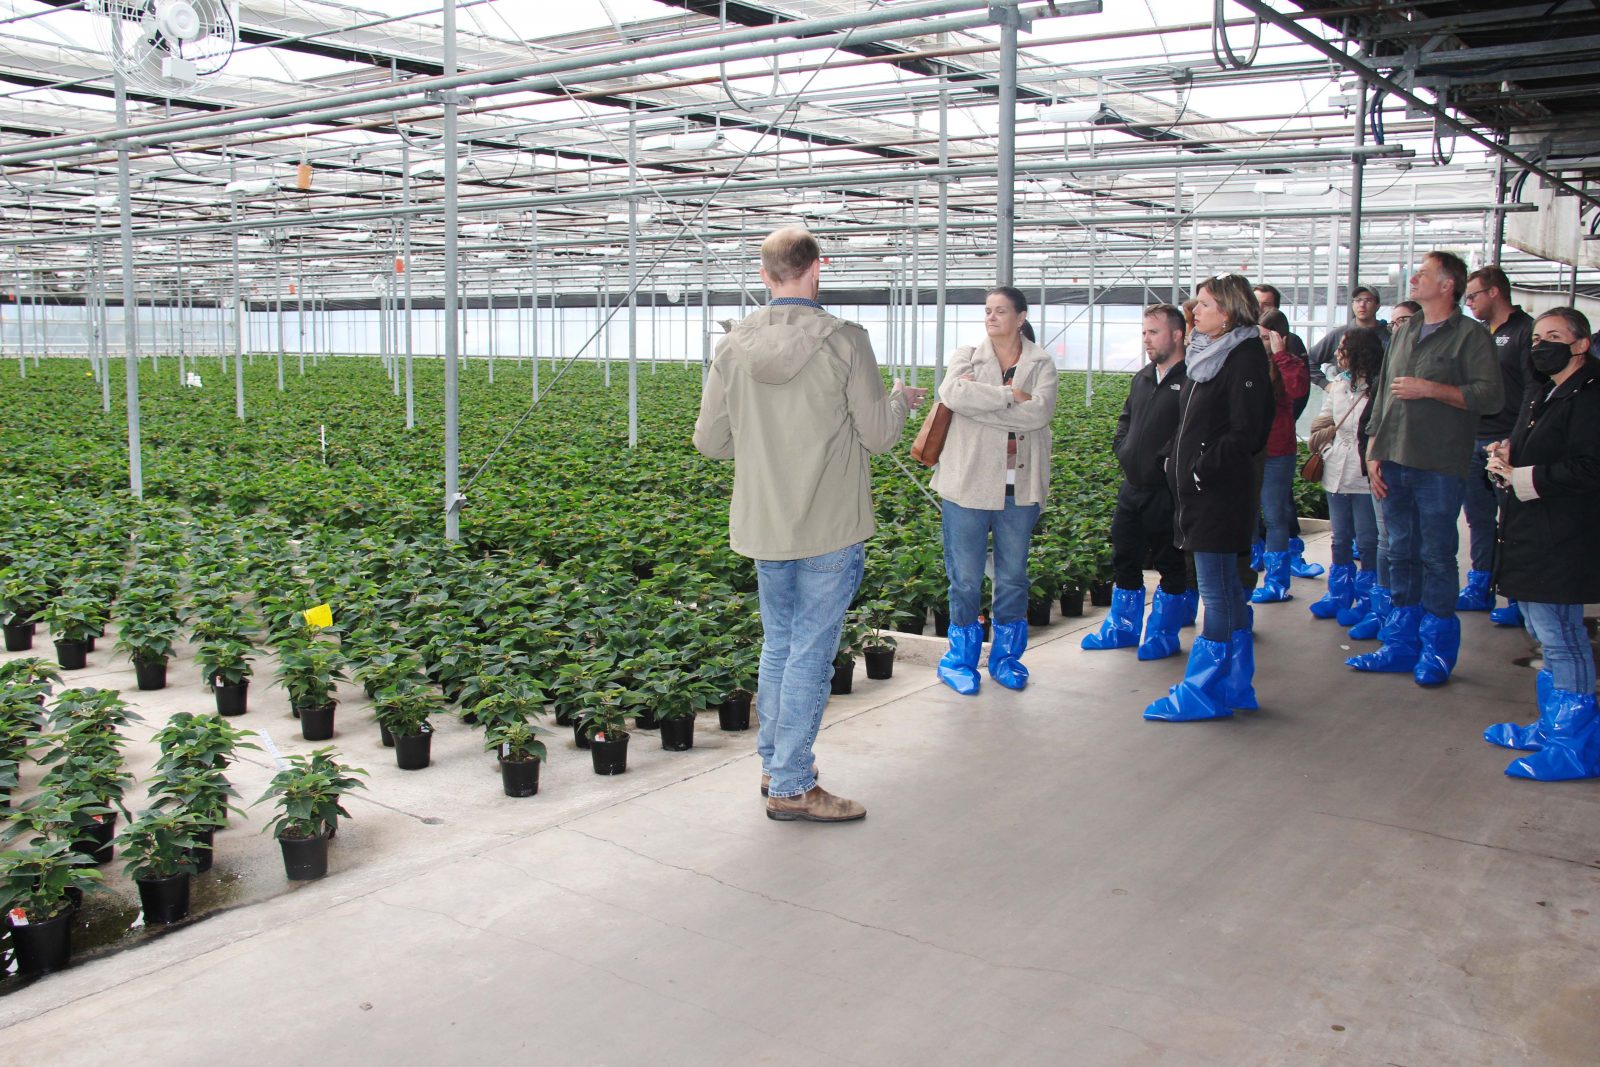 A man speaks to a group of people inside a greenhouse.